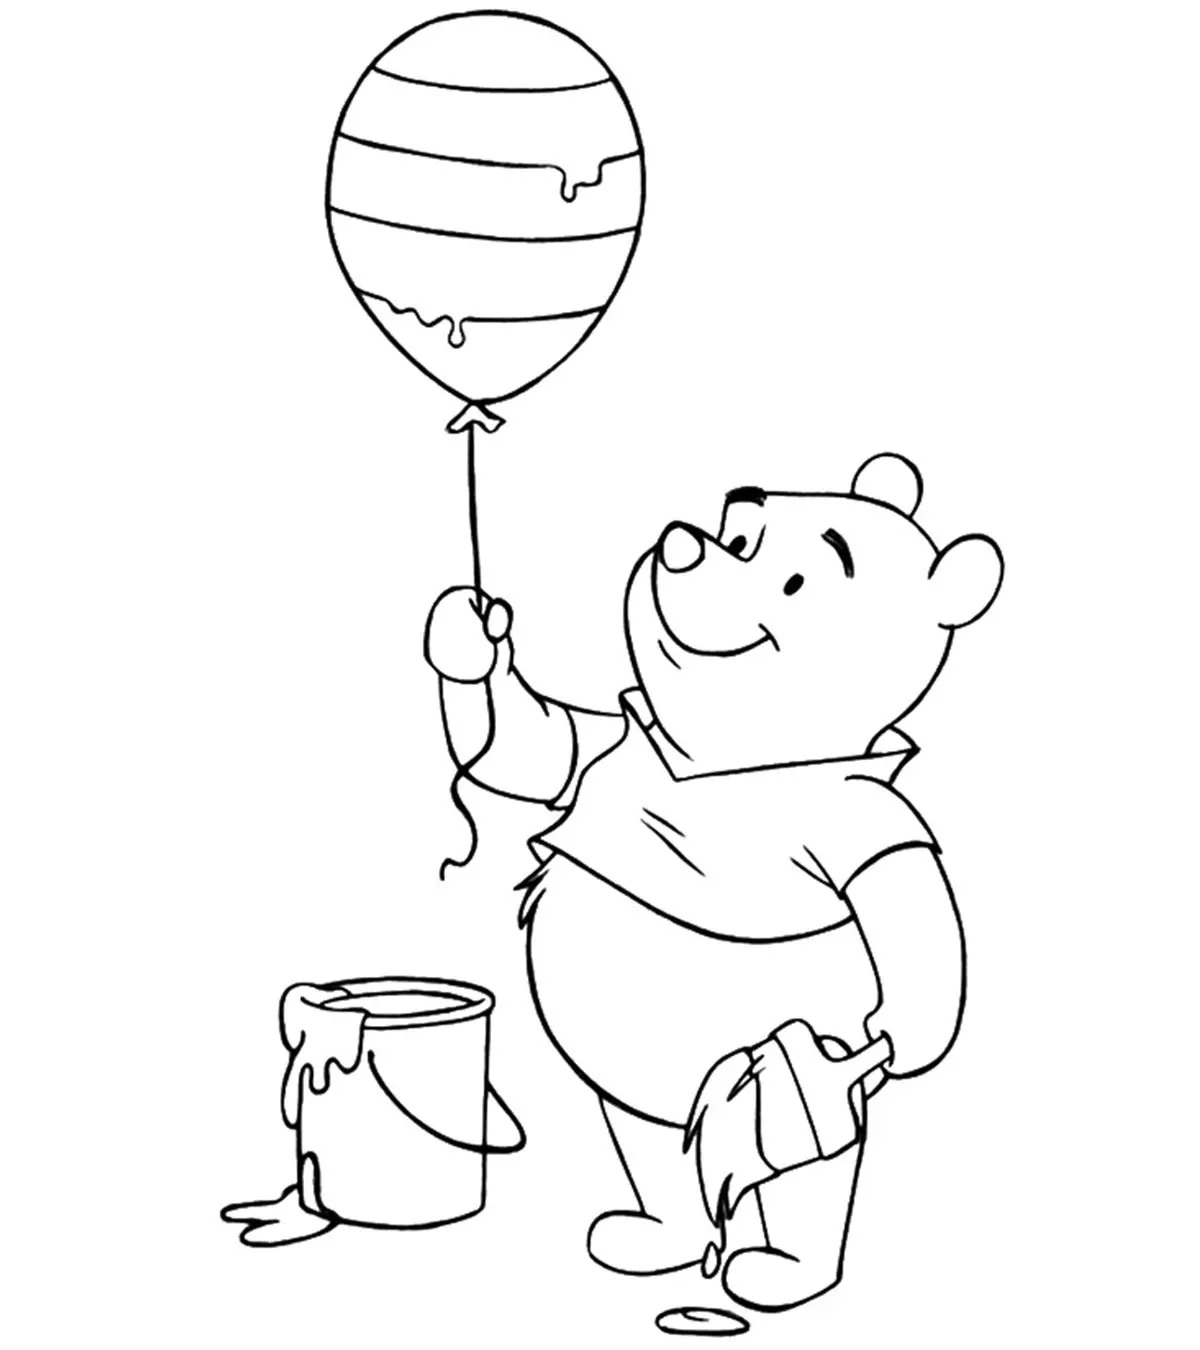 10 Cute Balloon Coloring Pages For Your Toddler